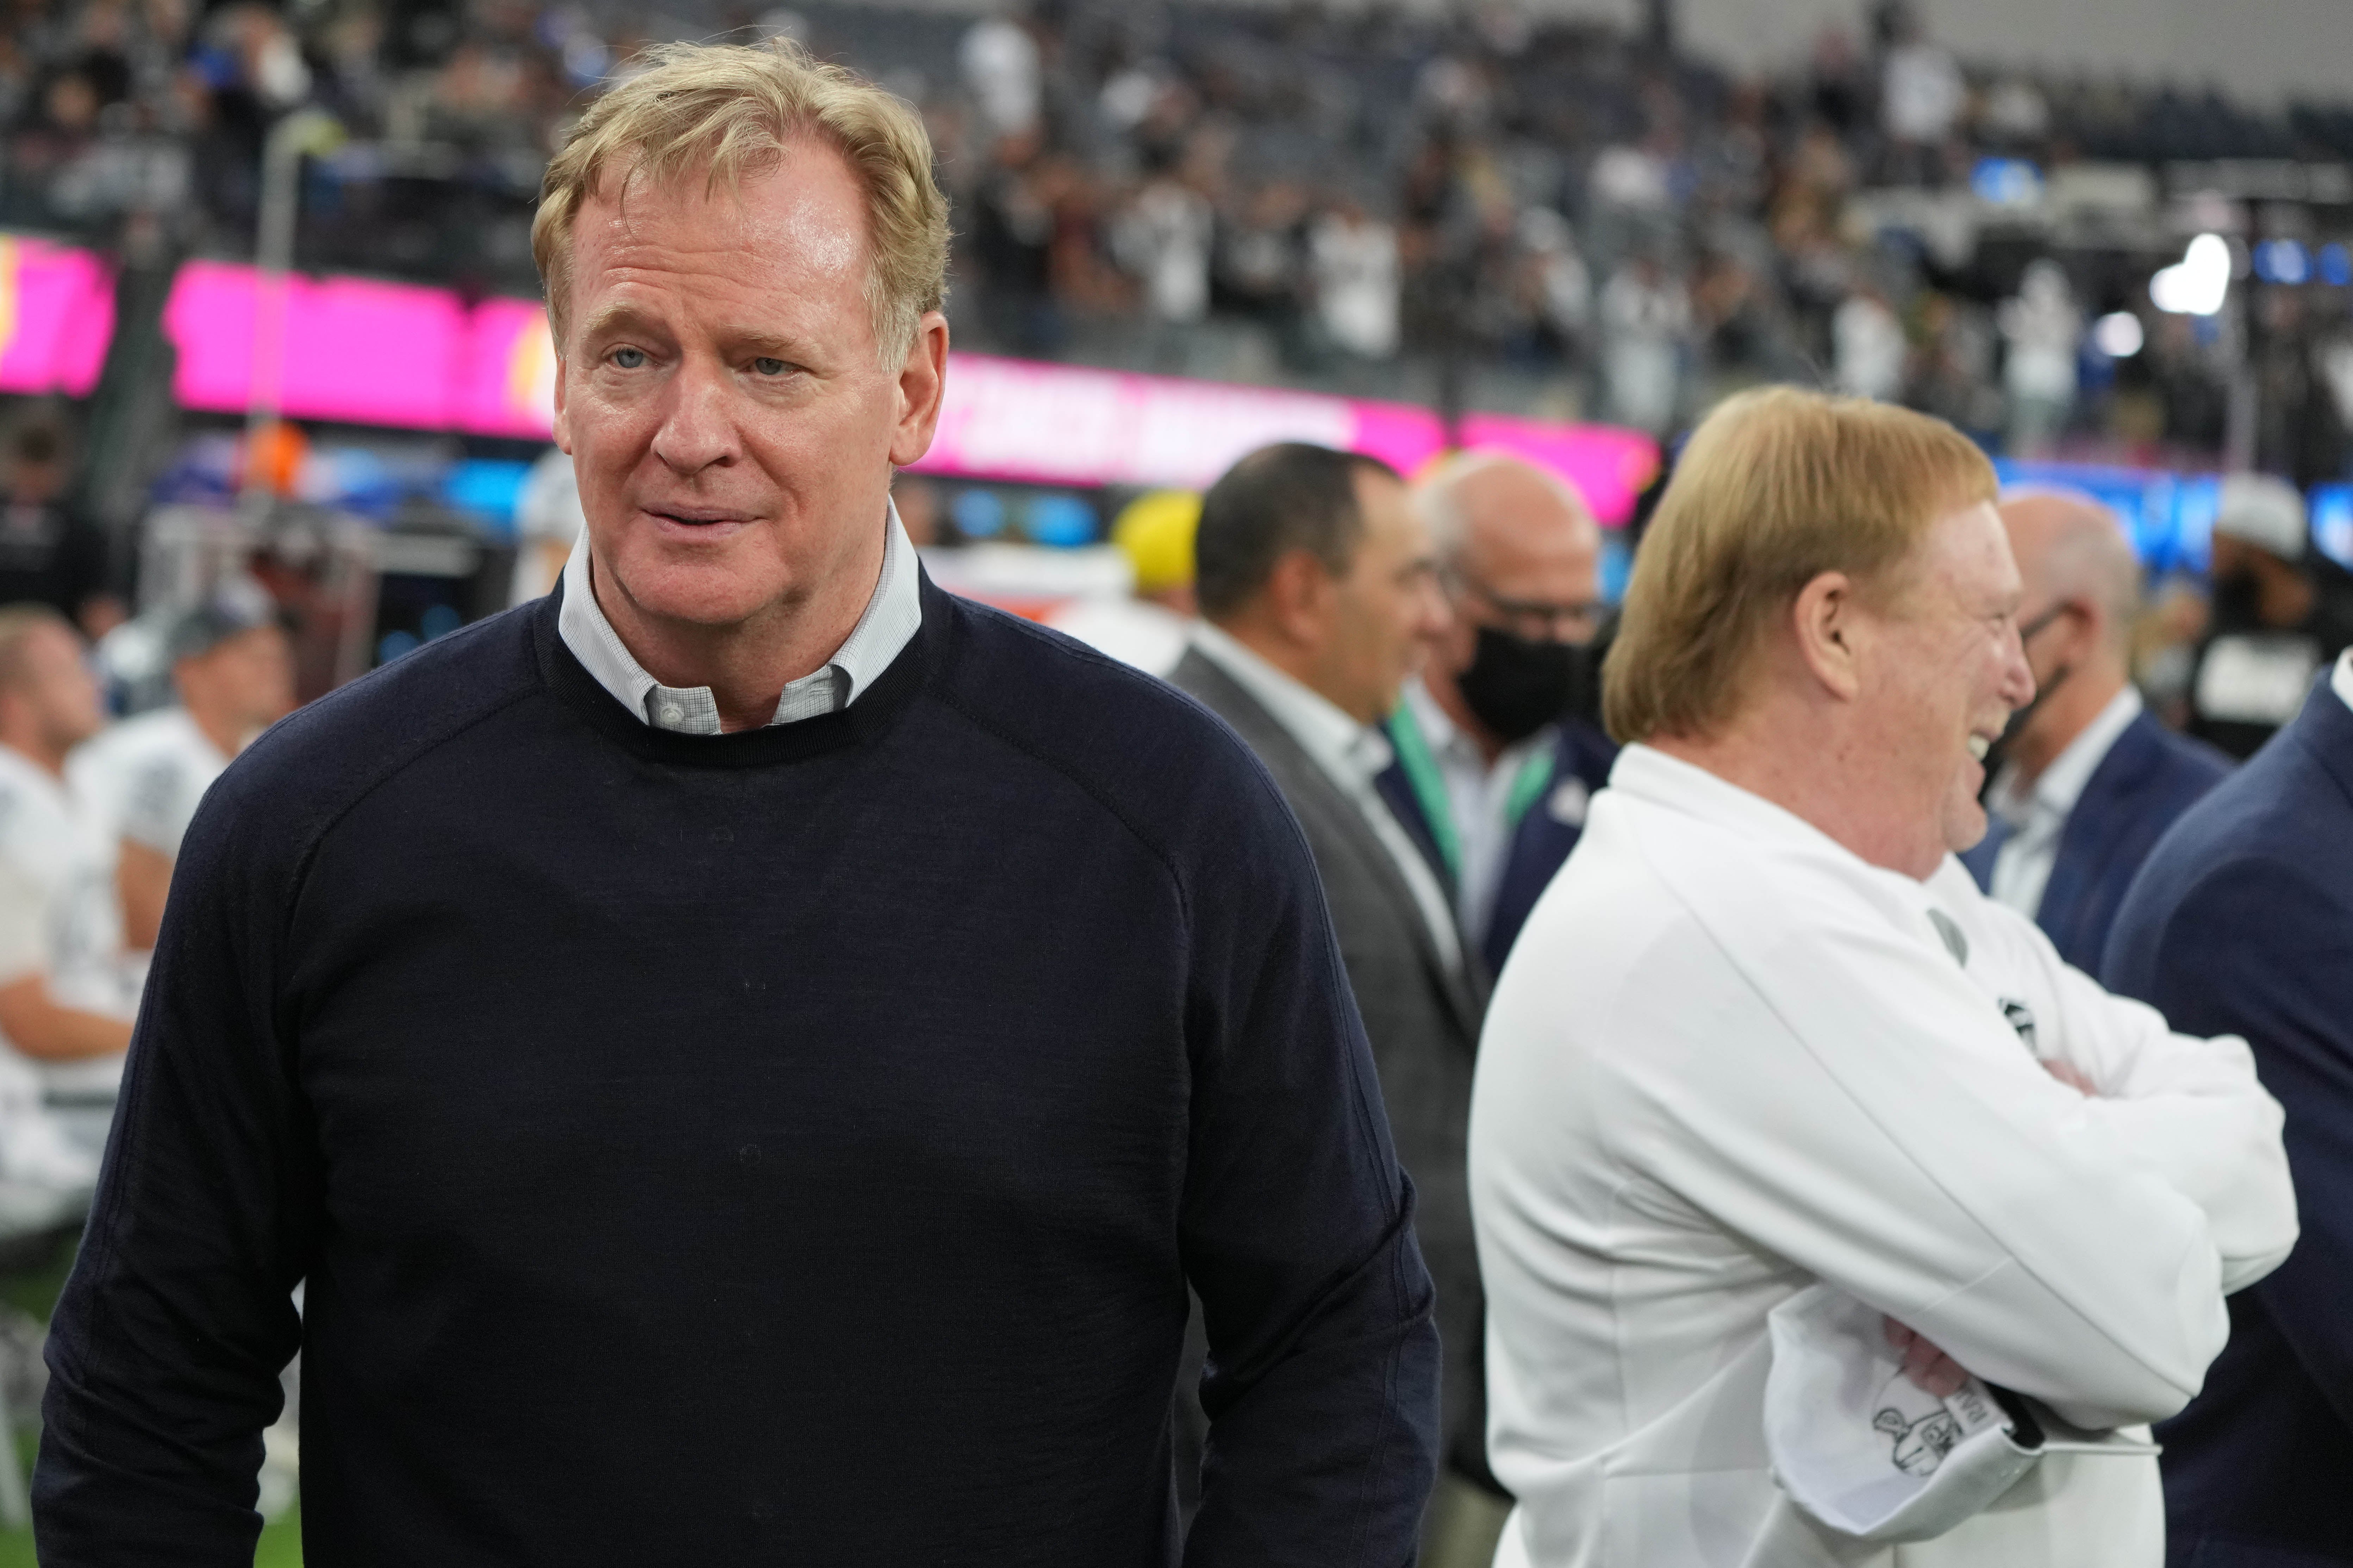 NFL commissioner Roger Goodell appeared to walk back the league’s earlier denial